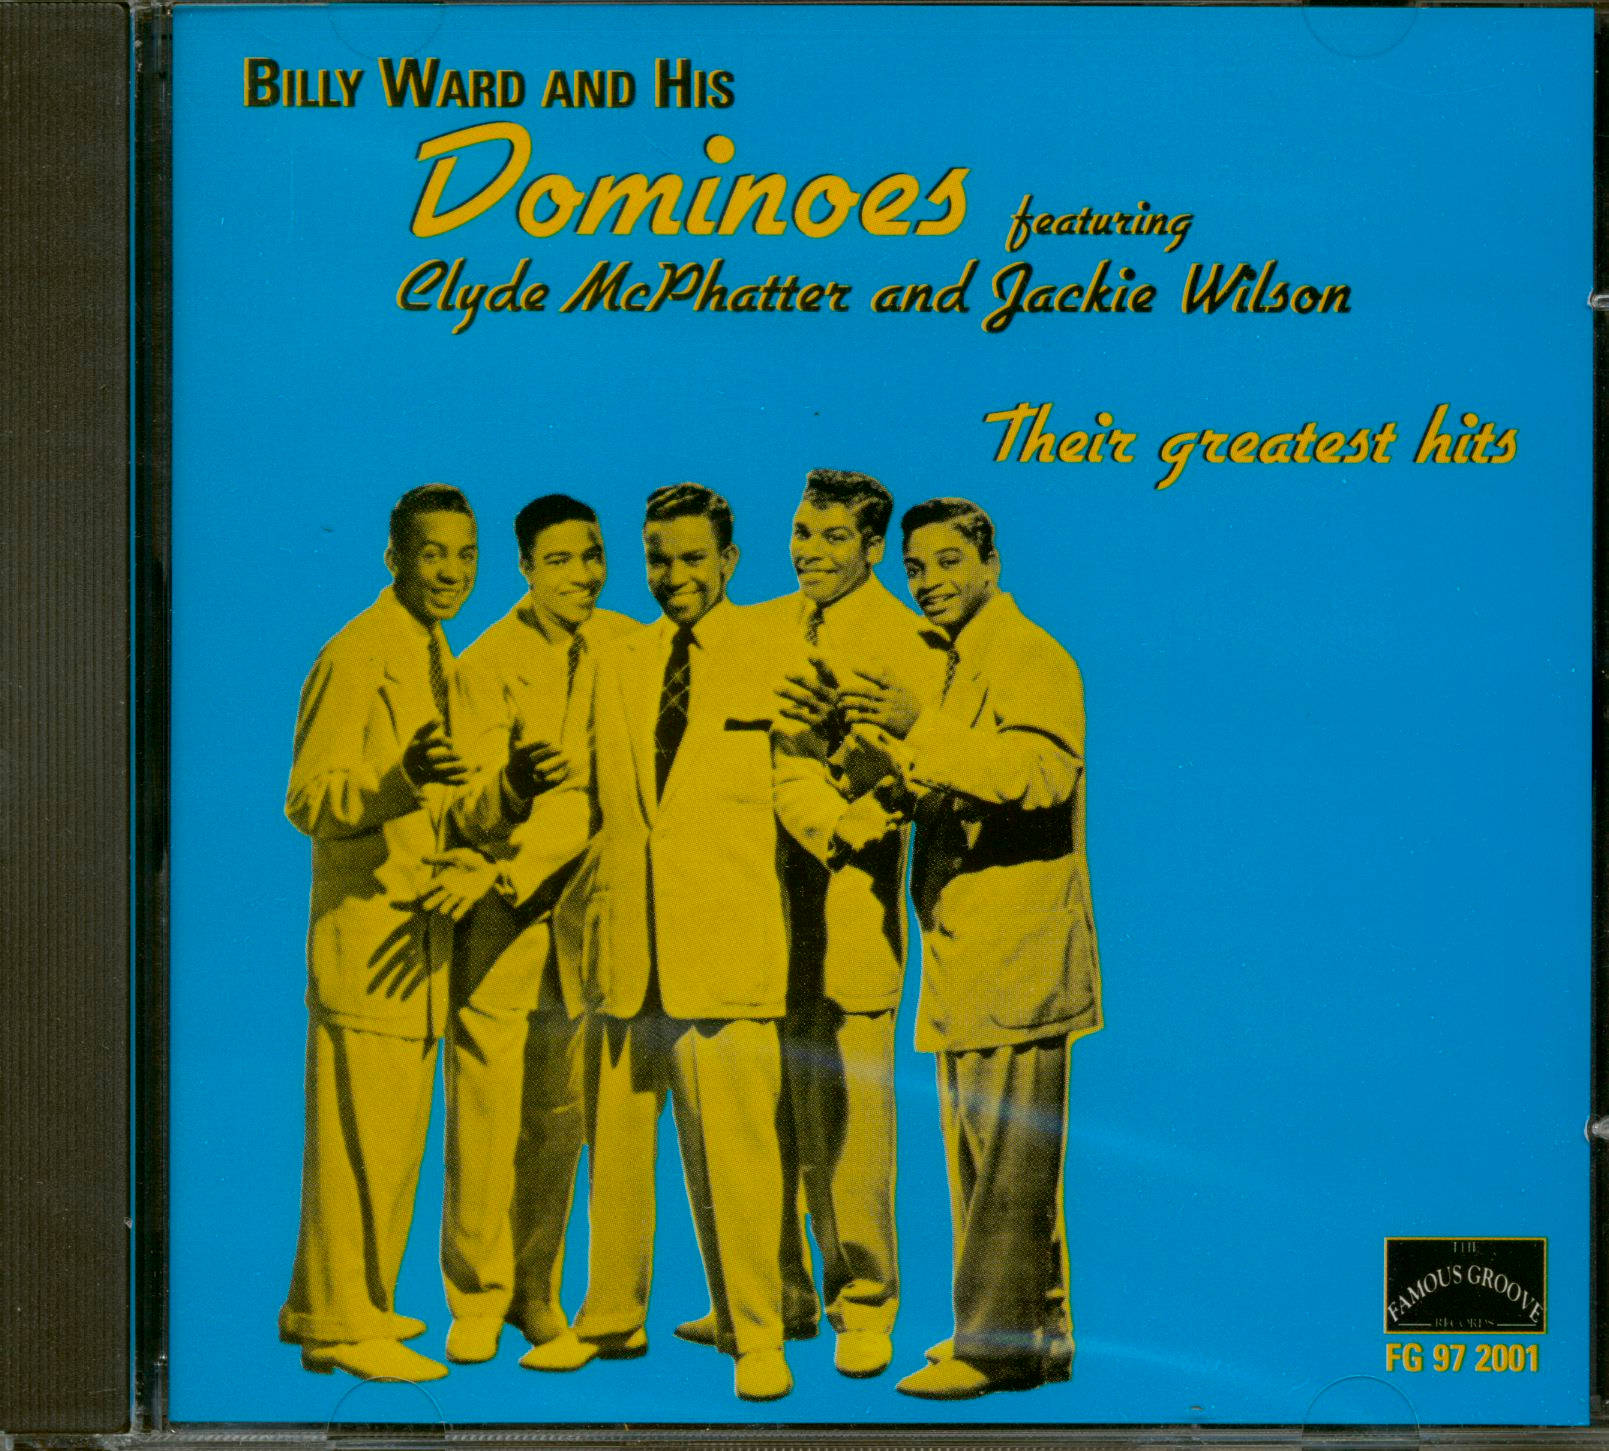 Vintage Billy Ward and The Dominoes Compact Disc Cover Wallpaper